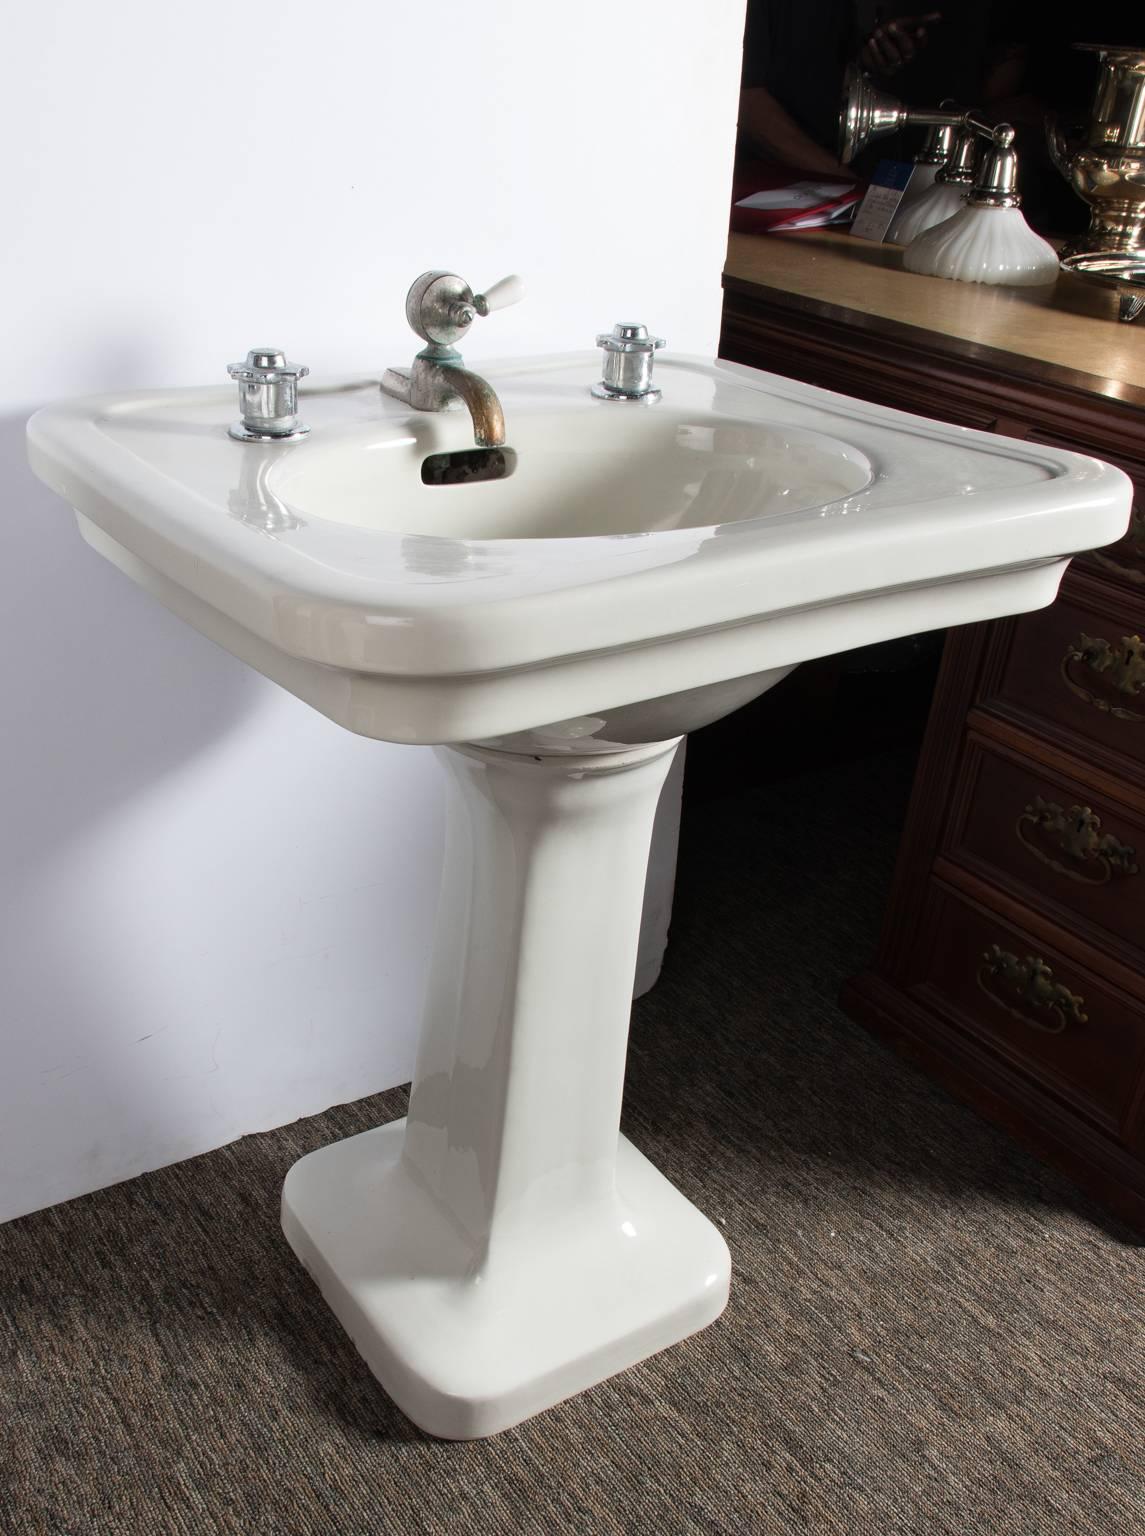 Small sized pedestal sink with replaced valves and original mixer, circa 1910.
 